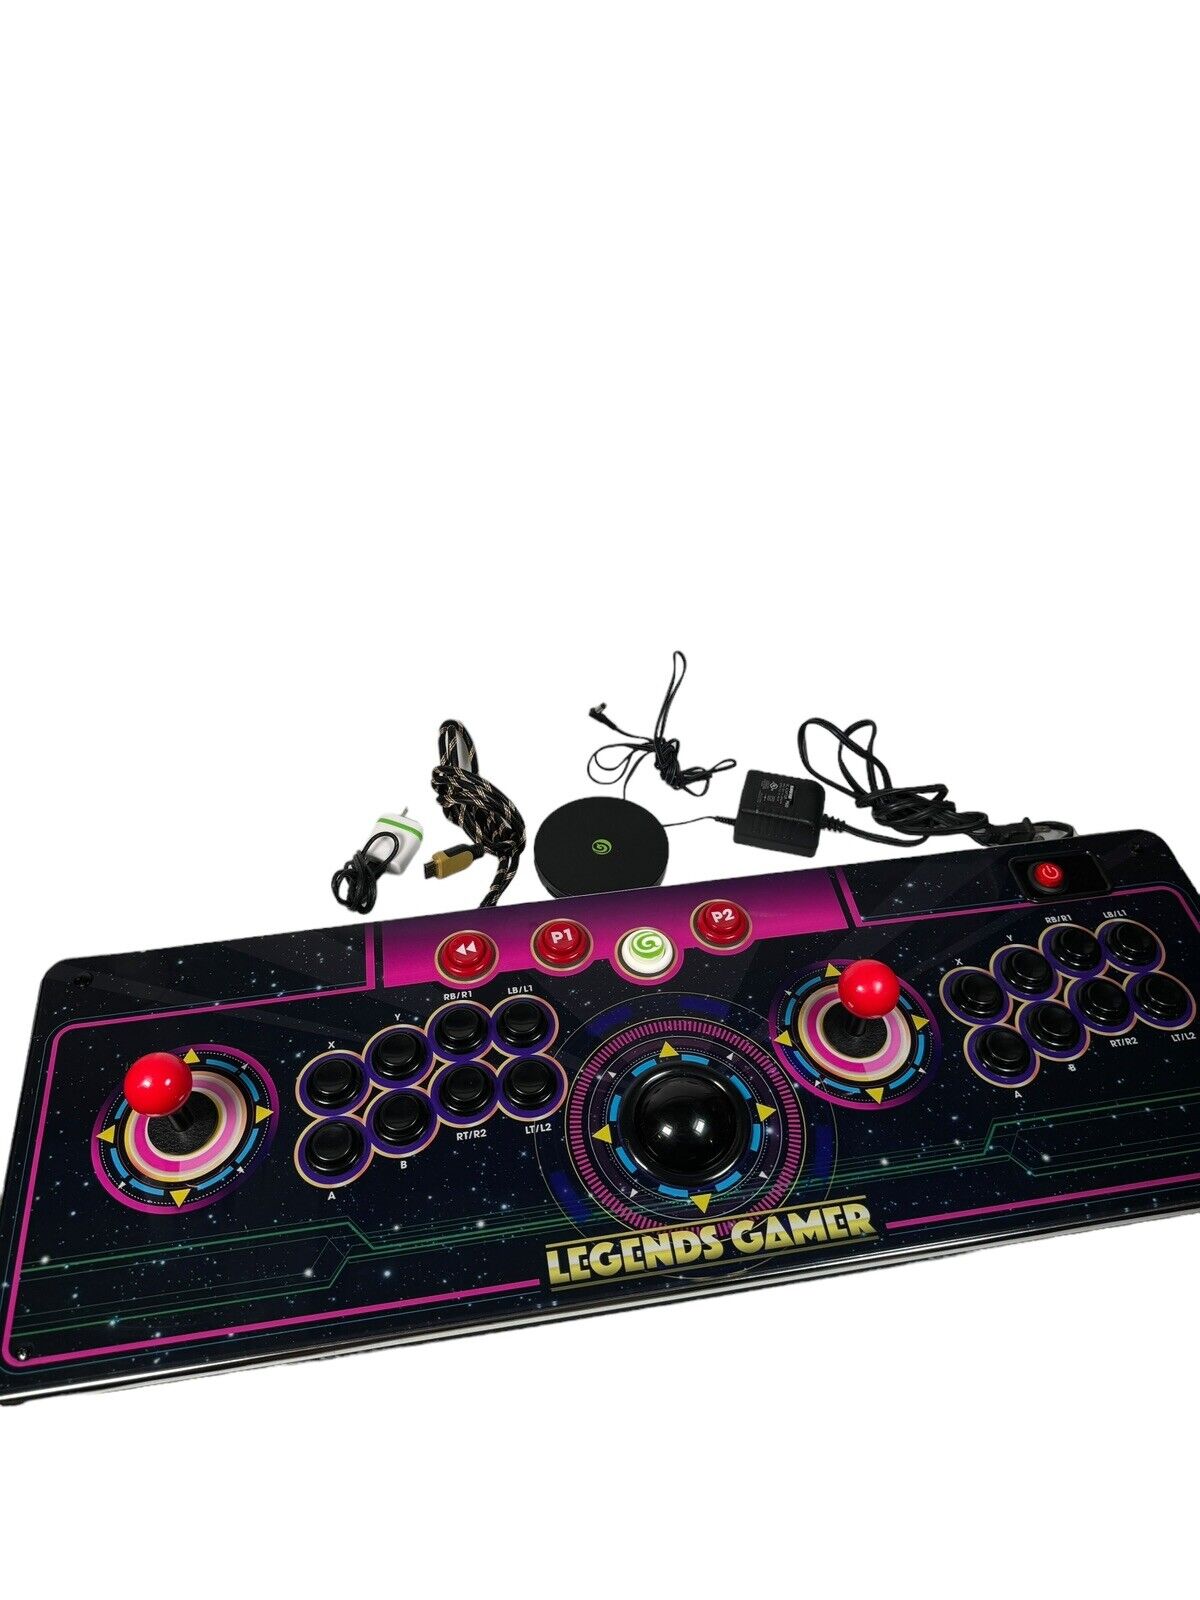 AtGames Legends Gamer Pro HA2802 Home Arcade Wireless Console with Trackball